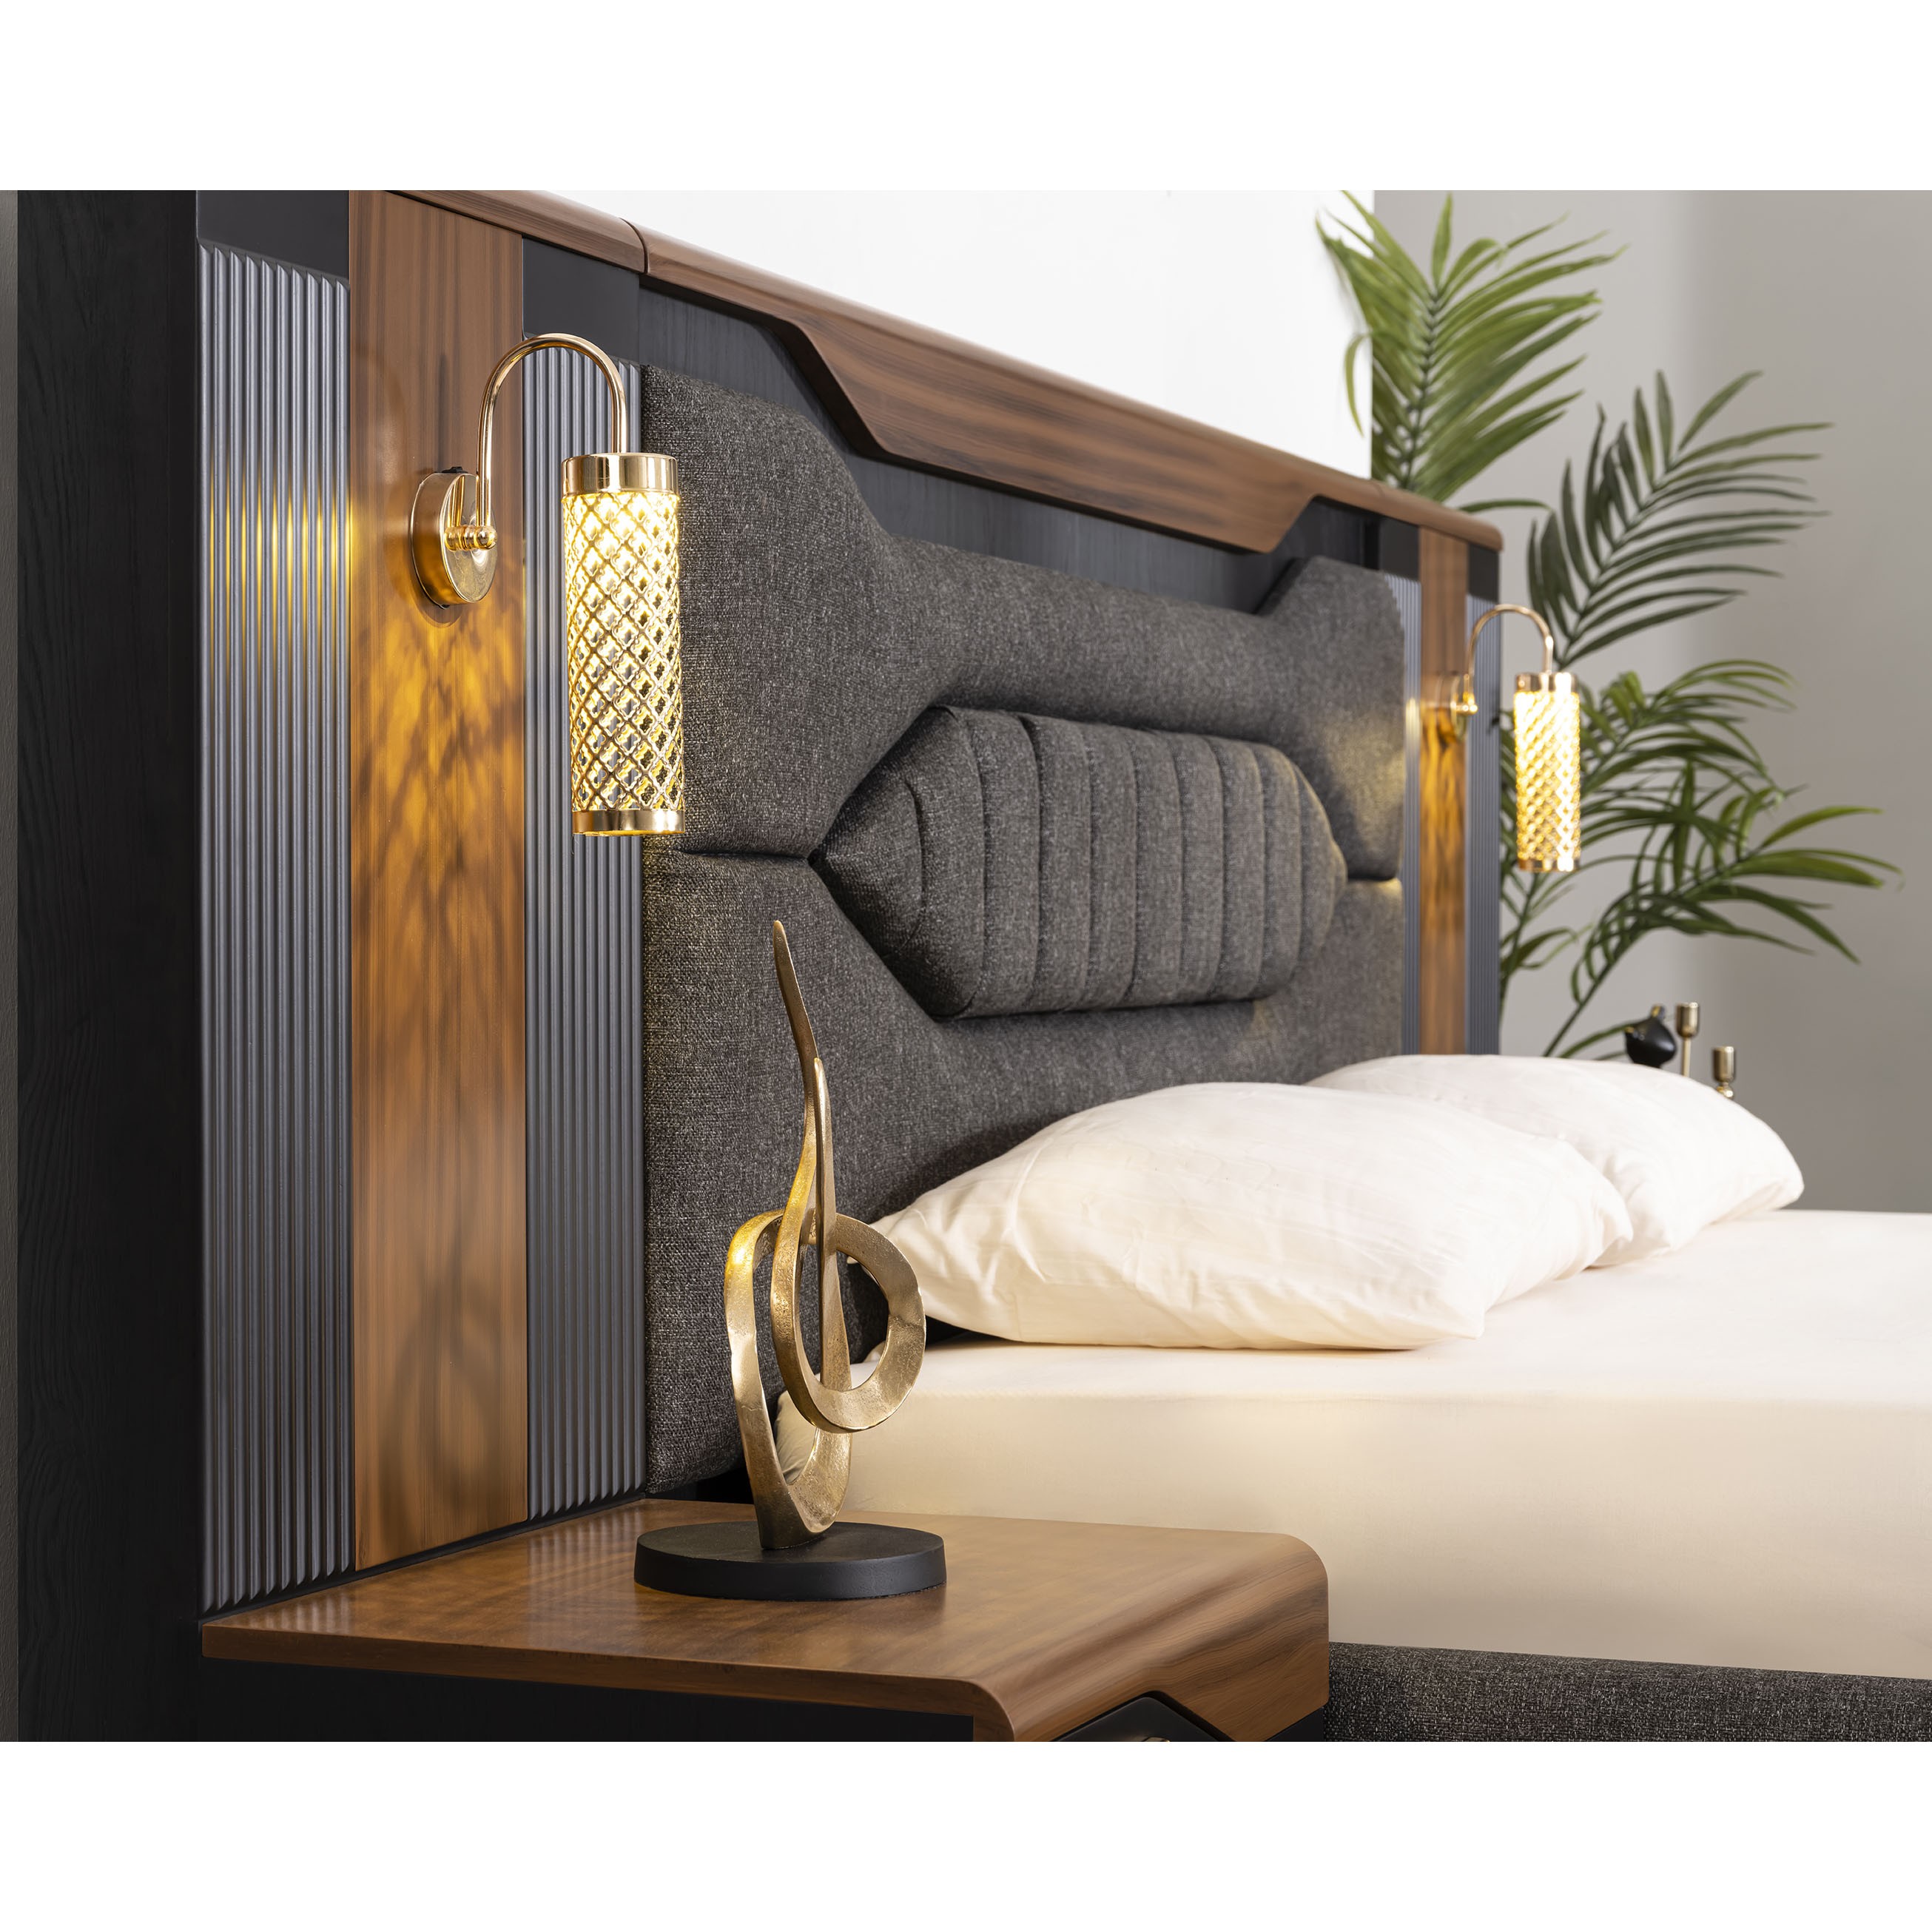 Style Hermes Vol2 Bed Without Storage 160x200 cm